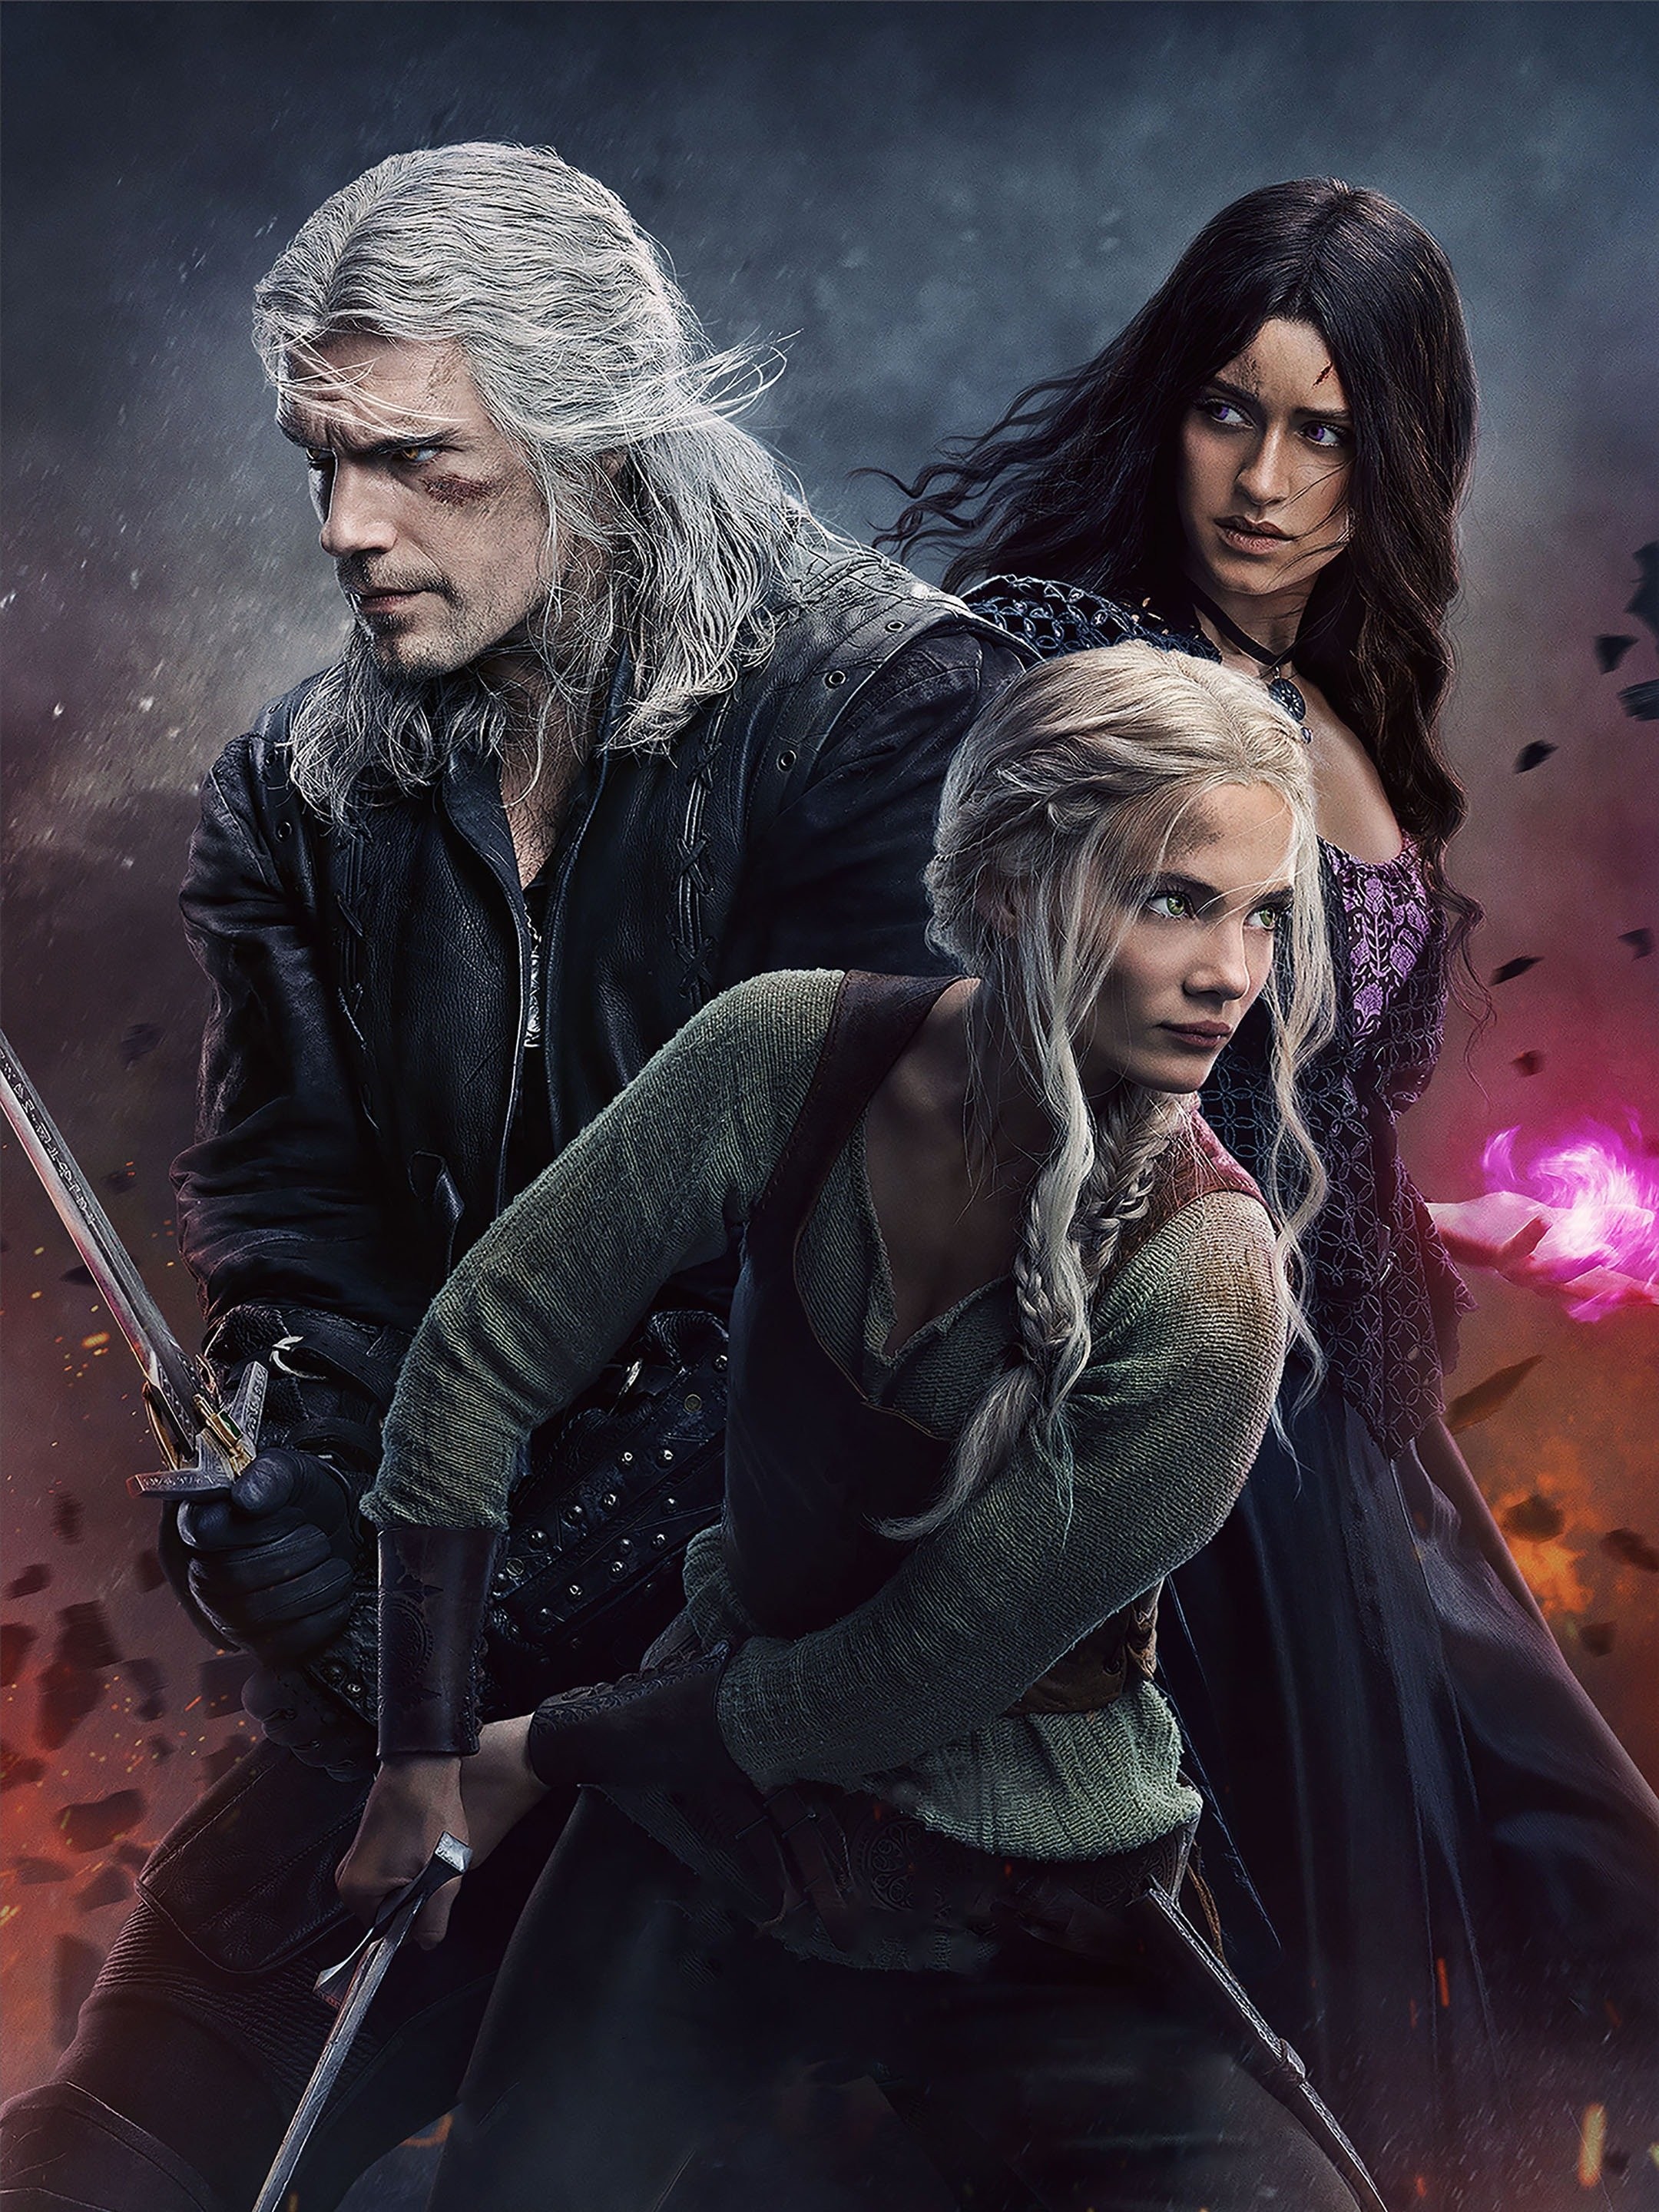 The Witcher Sirens of the Deep: Plot, Premiere Date, Teaser Trailer of  Animated Movie - Netflix Tudum